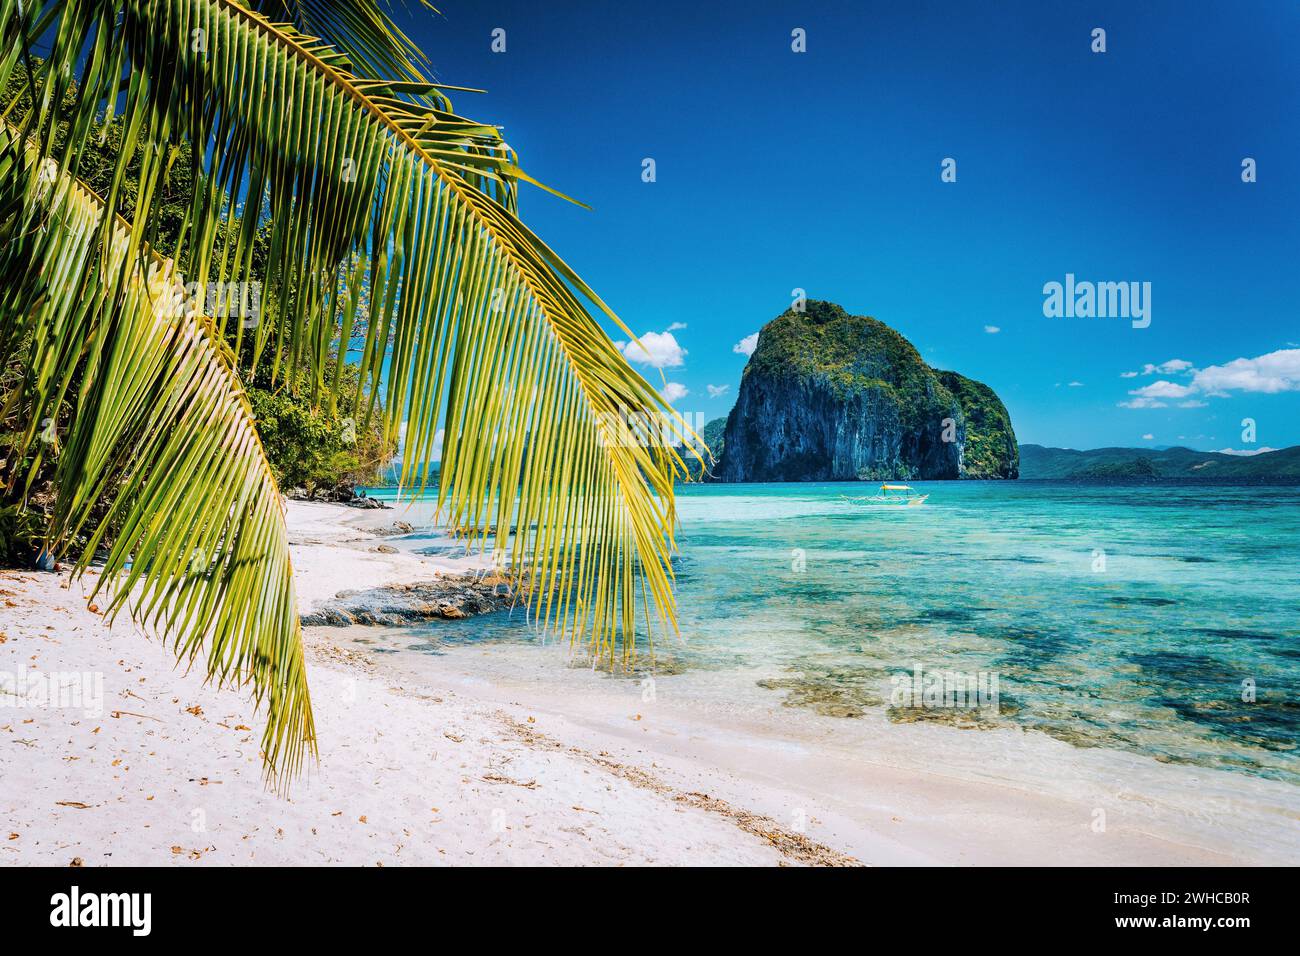 Palm tree branches on sandy beach with impressive Pinagbuyutan island in background. Dreamlike landscape scenery in El Nido, Palawan, Philippines. Stock Photo